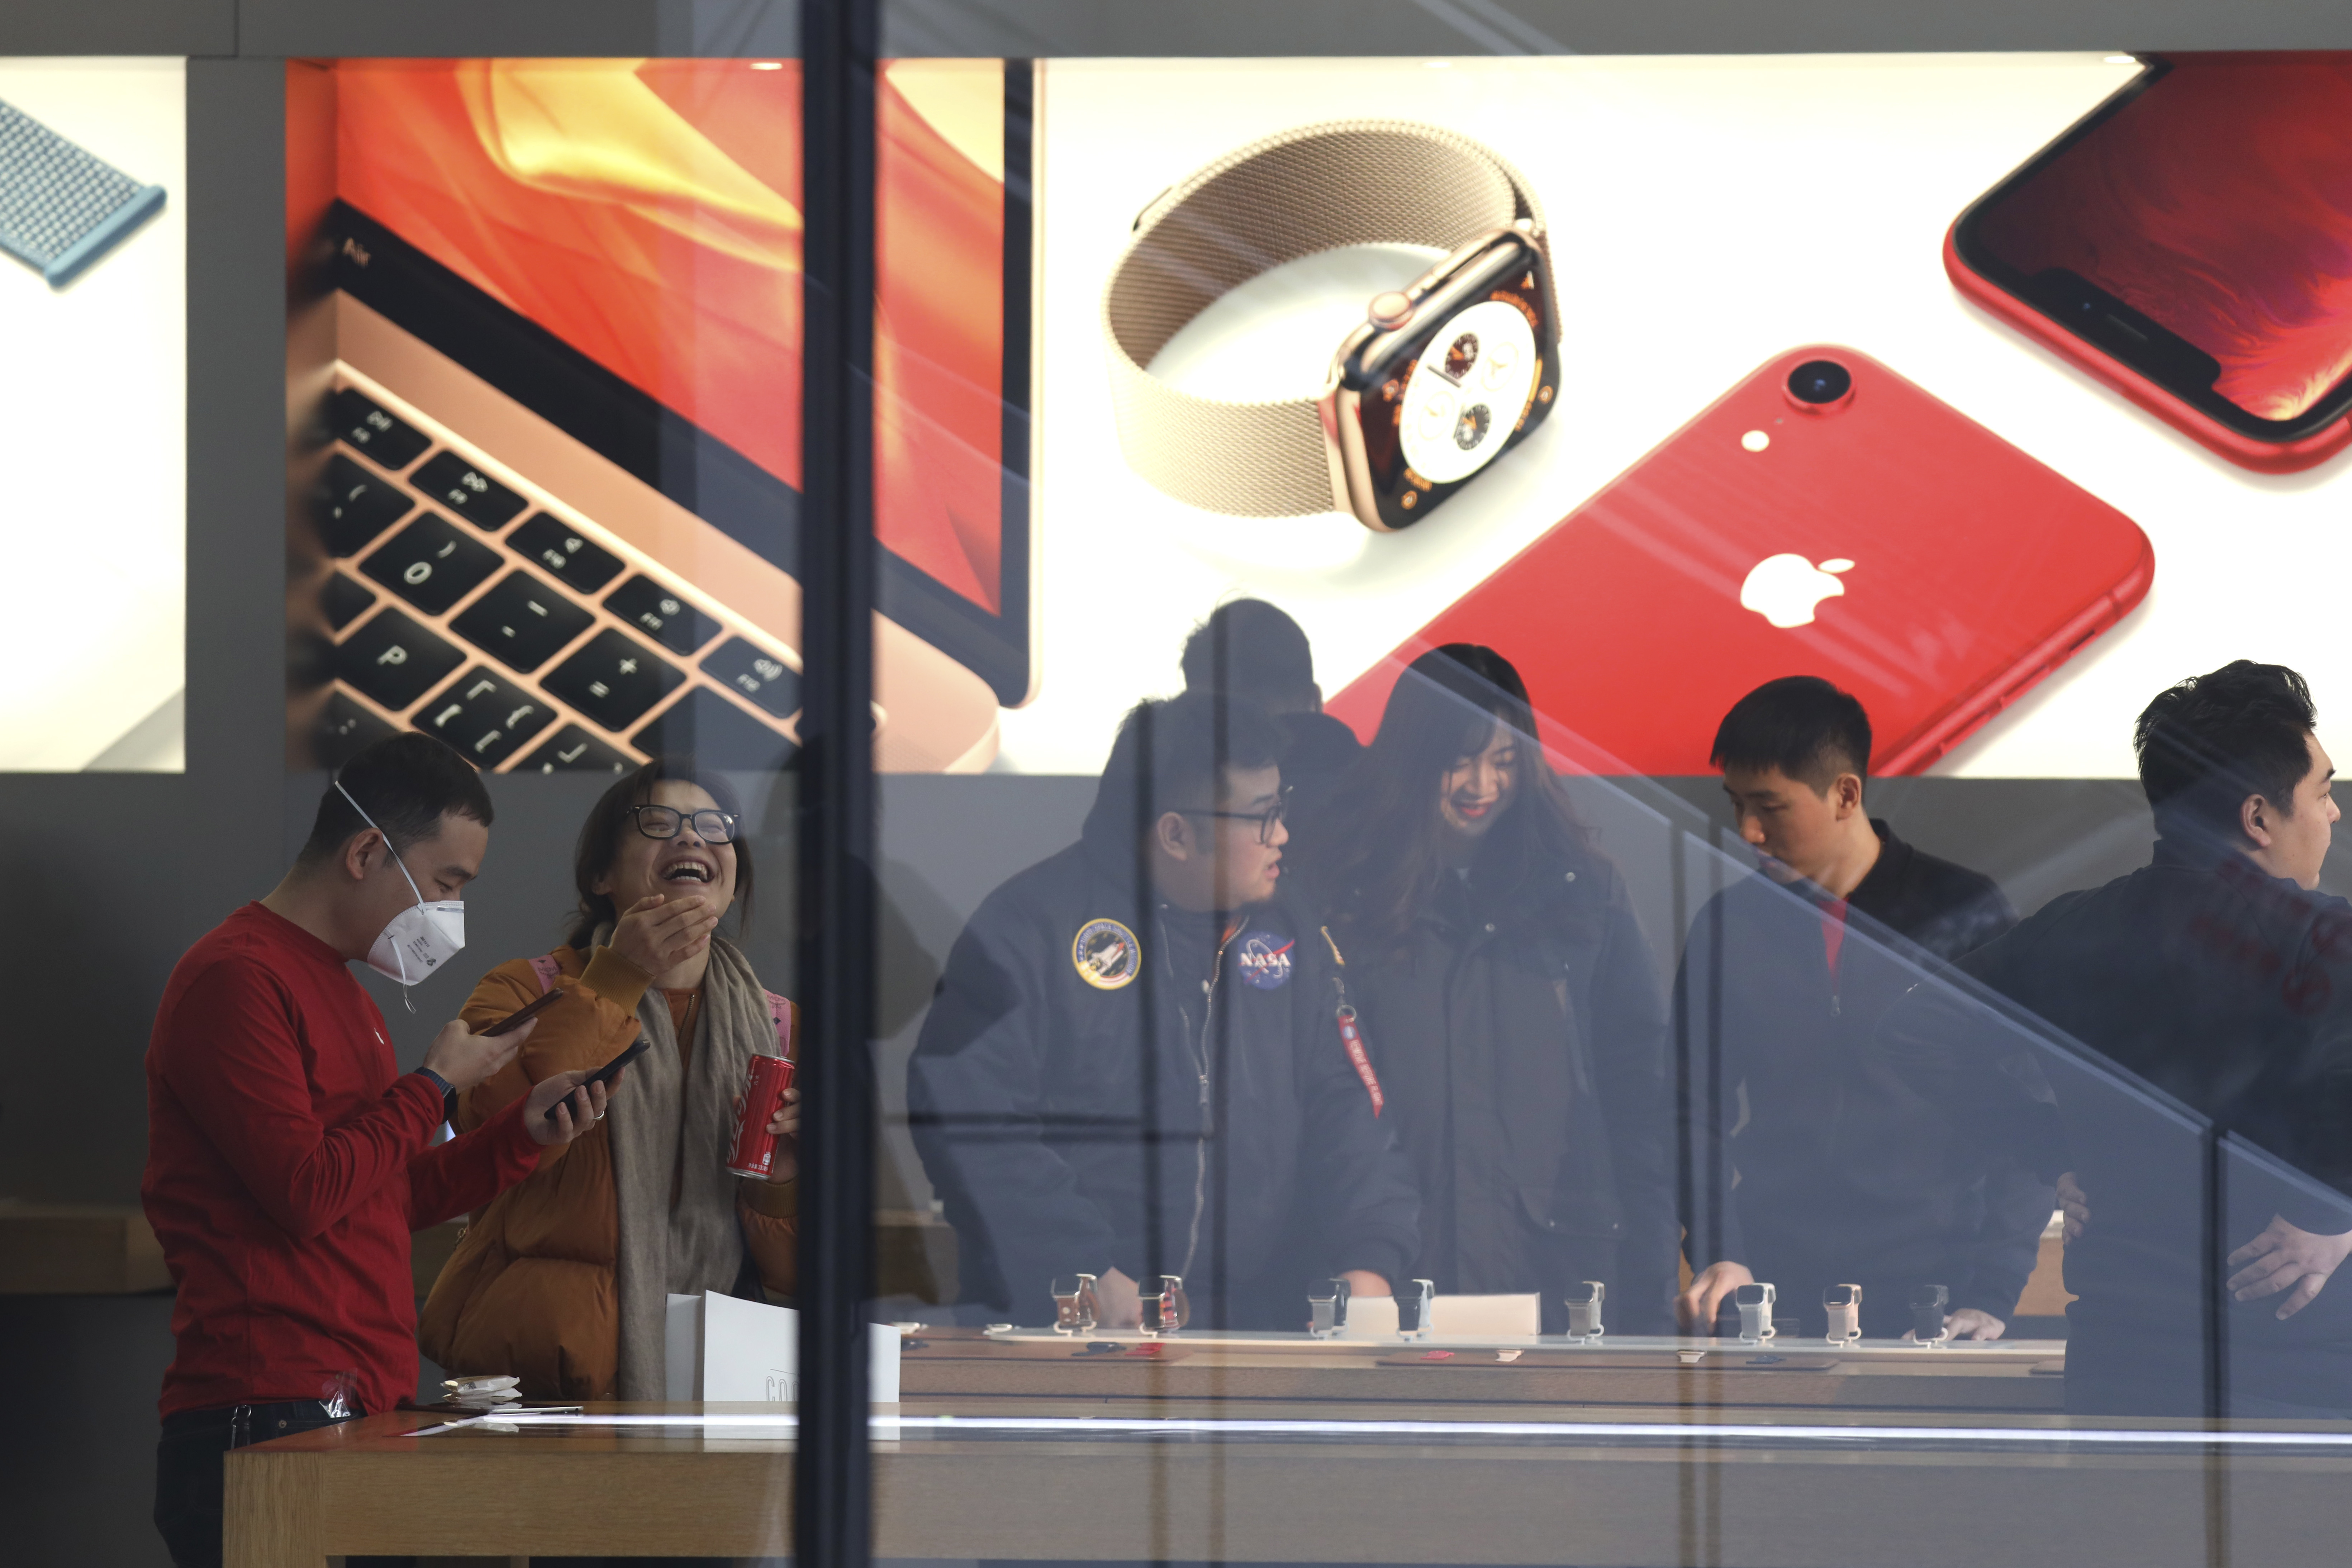 jammer kit online auction | Waning iPhone Demand Highlights Chinese Consumer Anxiety